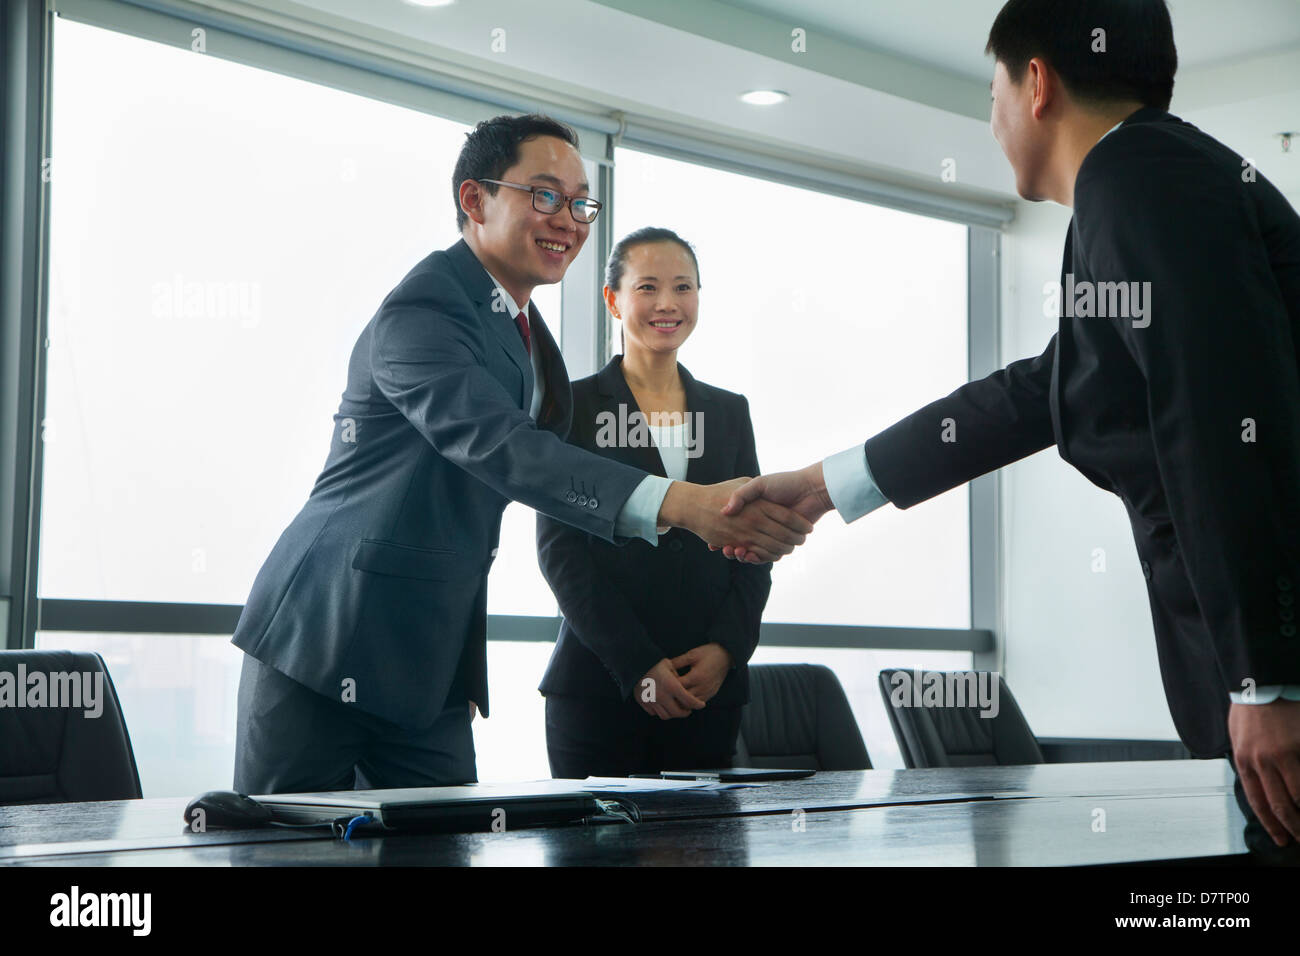 Businessmen Greeting Each Other with a Handshake Stock Photo